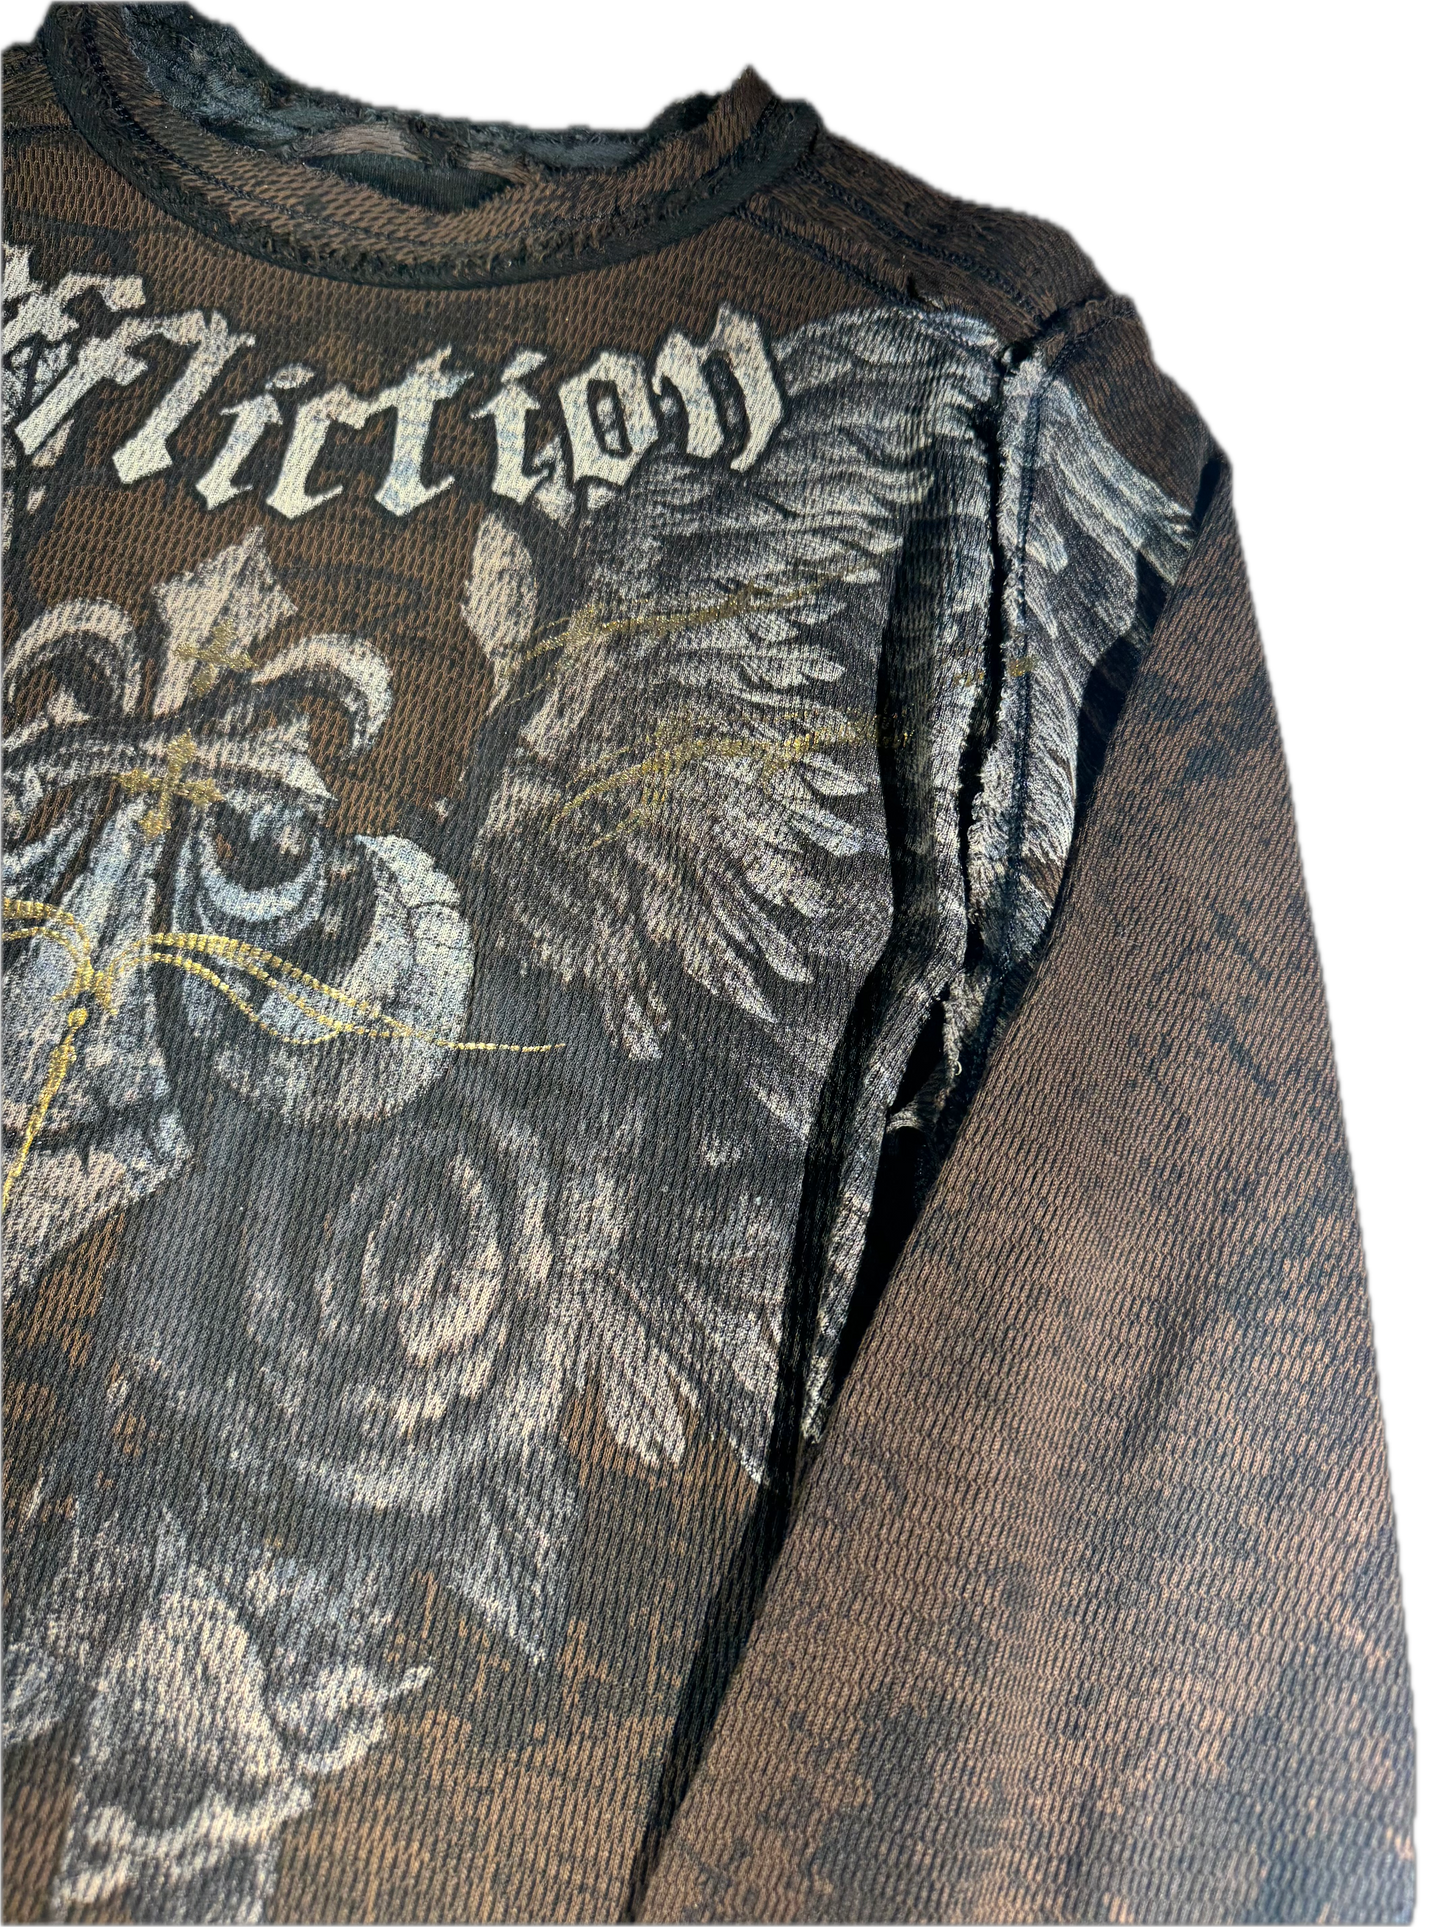 Vintage Affliction Top Long-Sleeve Exsposed Stitching